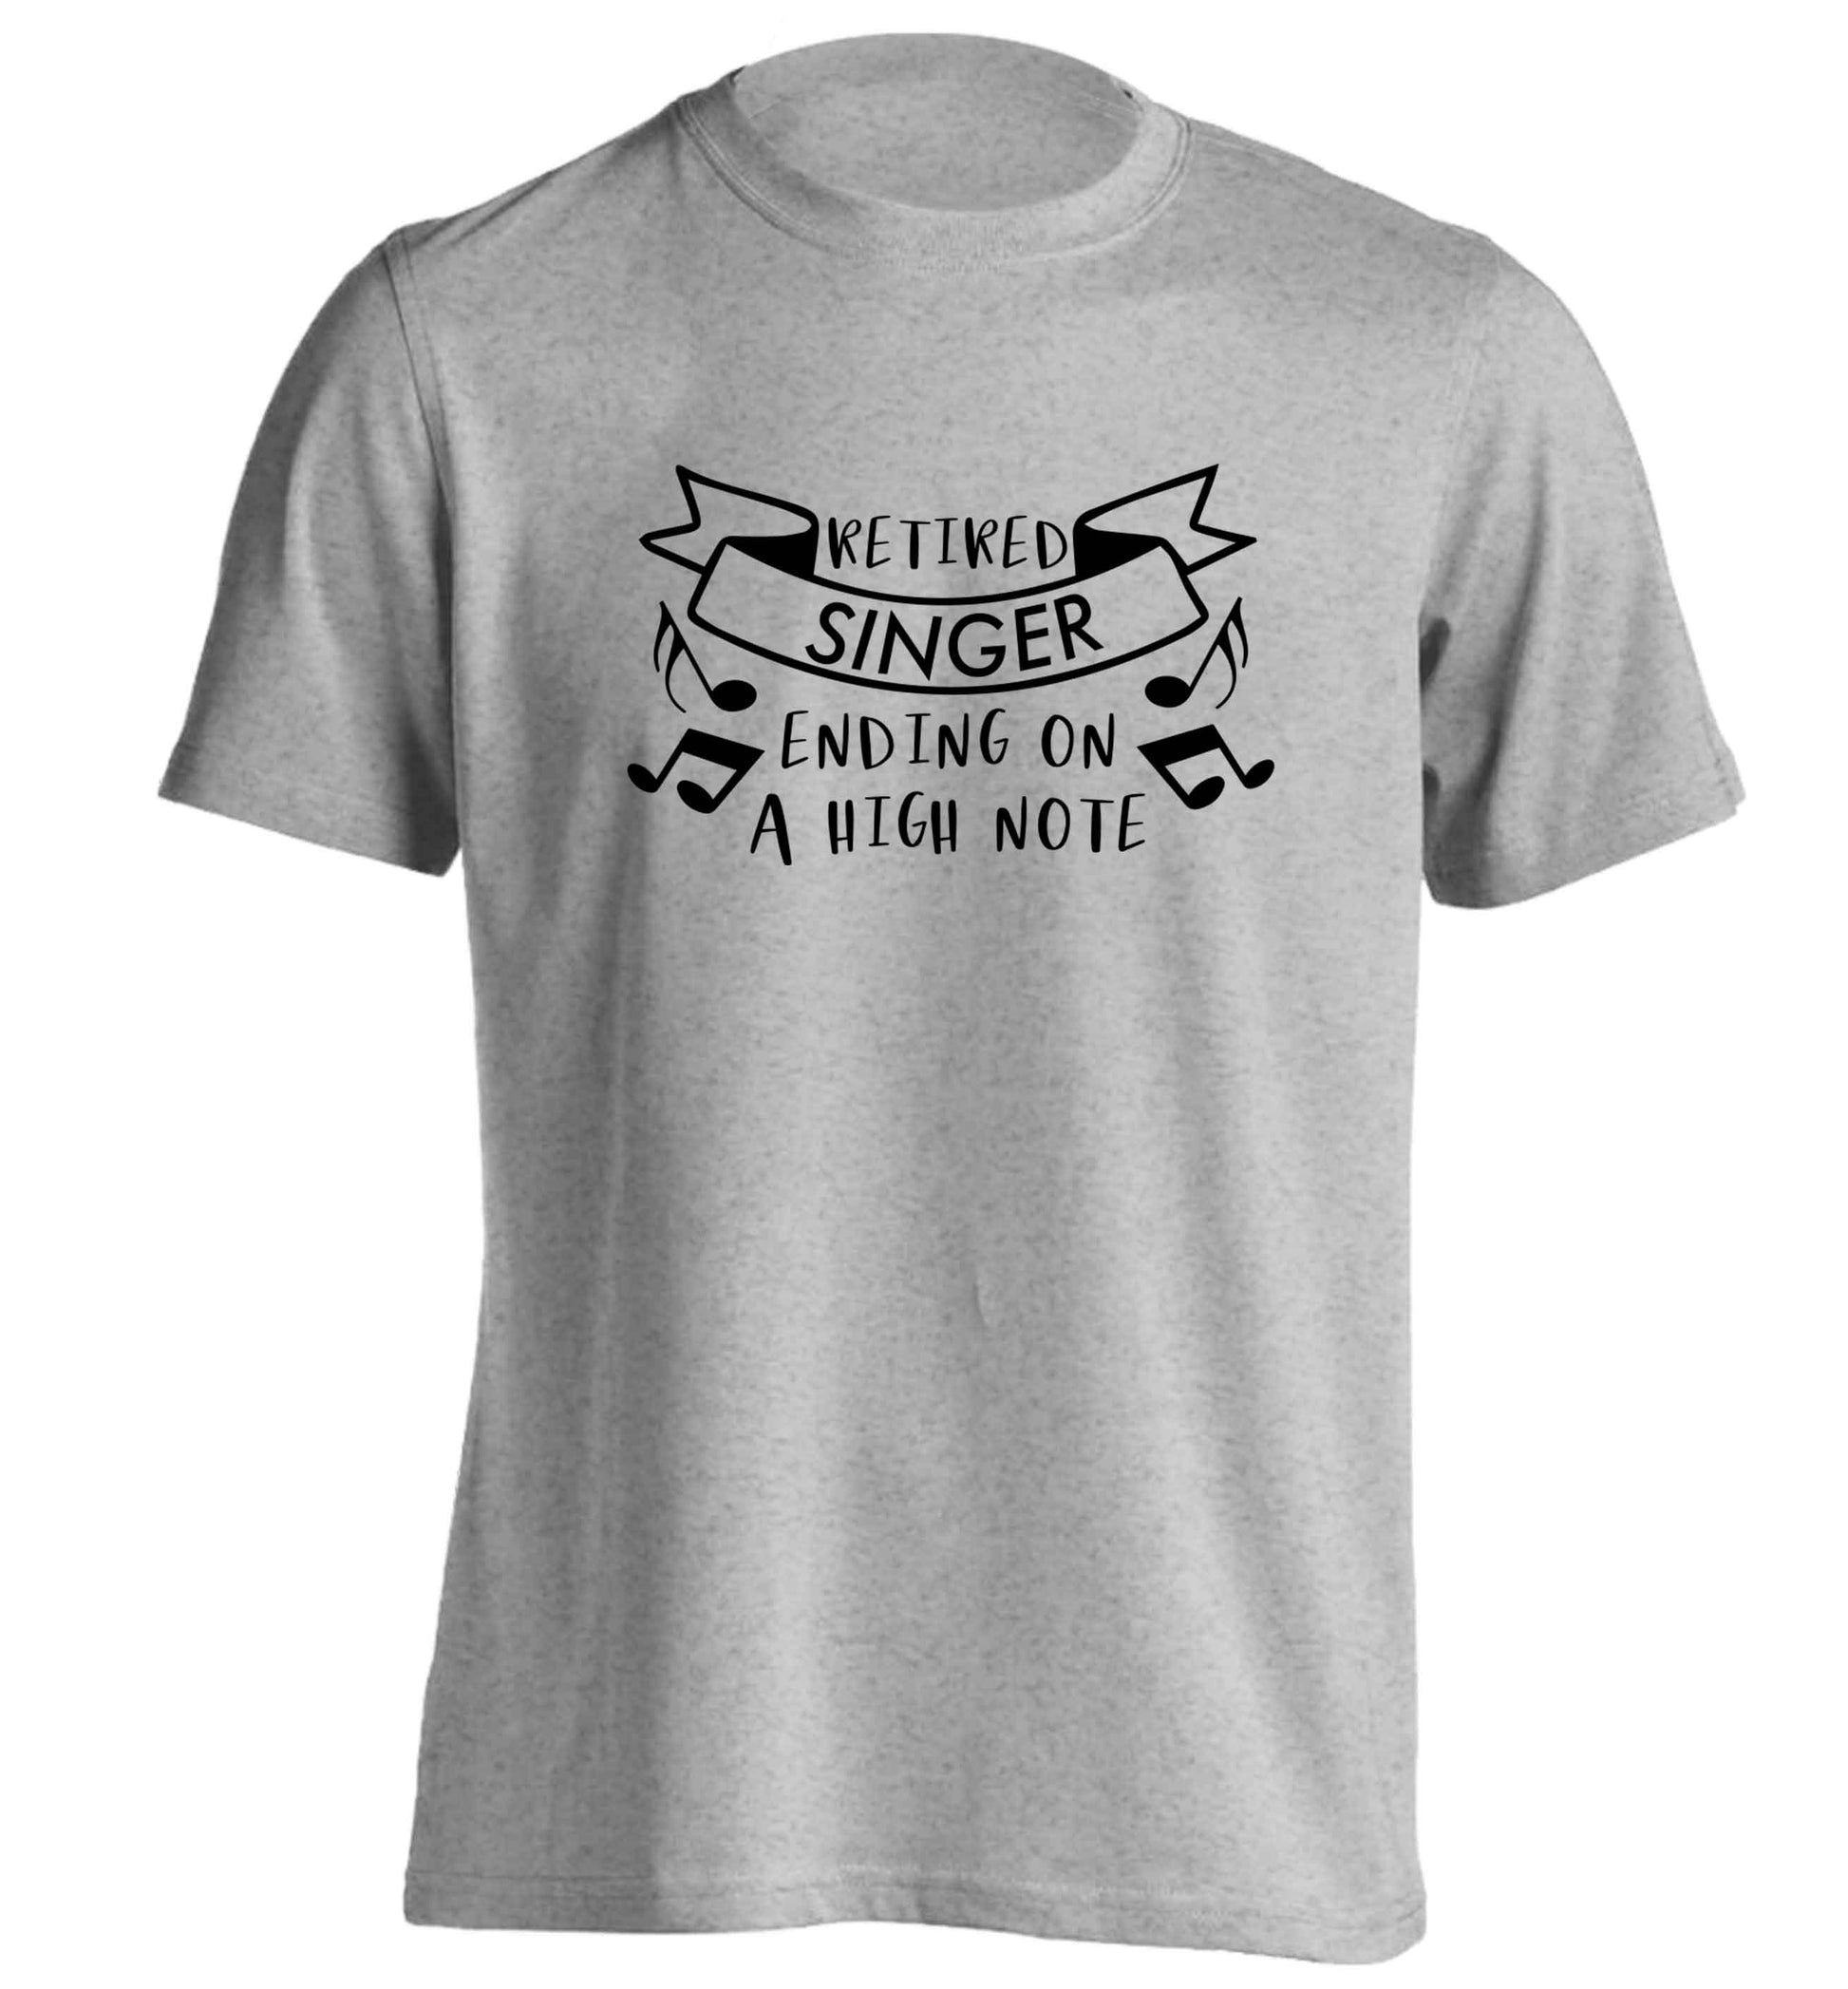 Retired singer ending on a high note adults unisex grey Tshirt 2XL